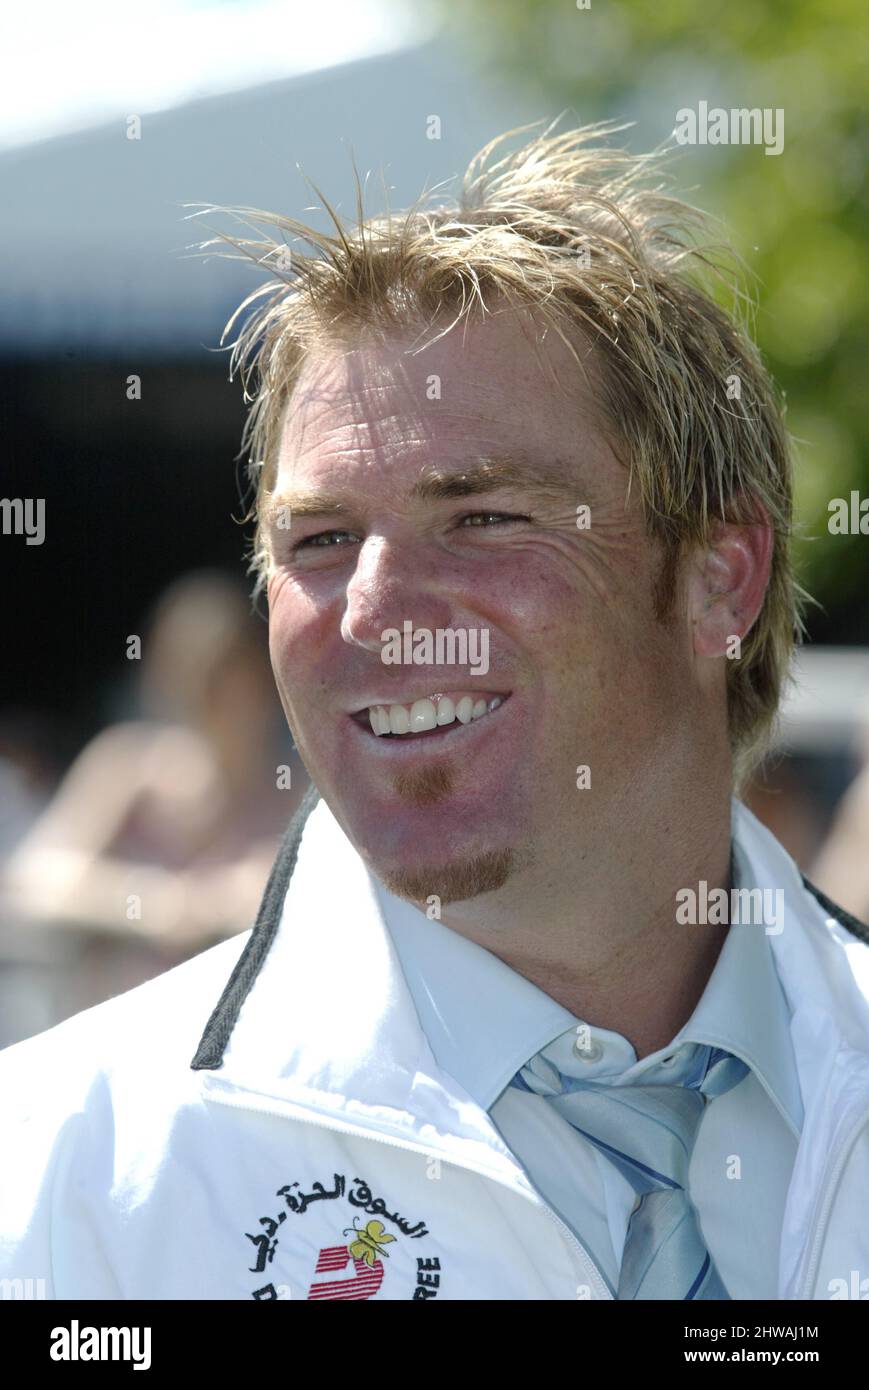 7 August 2004: Portrait of Dubai Duty Free Rest of the World Team leader SHANE WARNE on Blue Square Shergar Cup day at Ascot. Photo: Neil Tingle/action plus.horse racing 040807 cricket Stock Photo